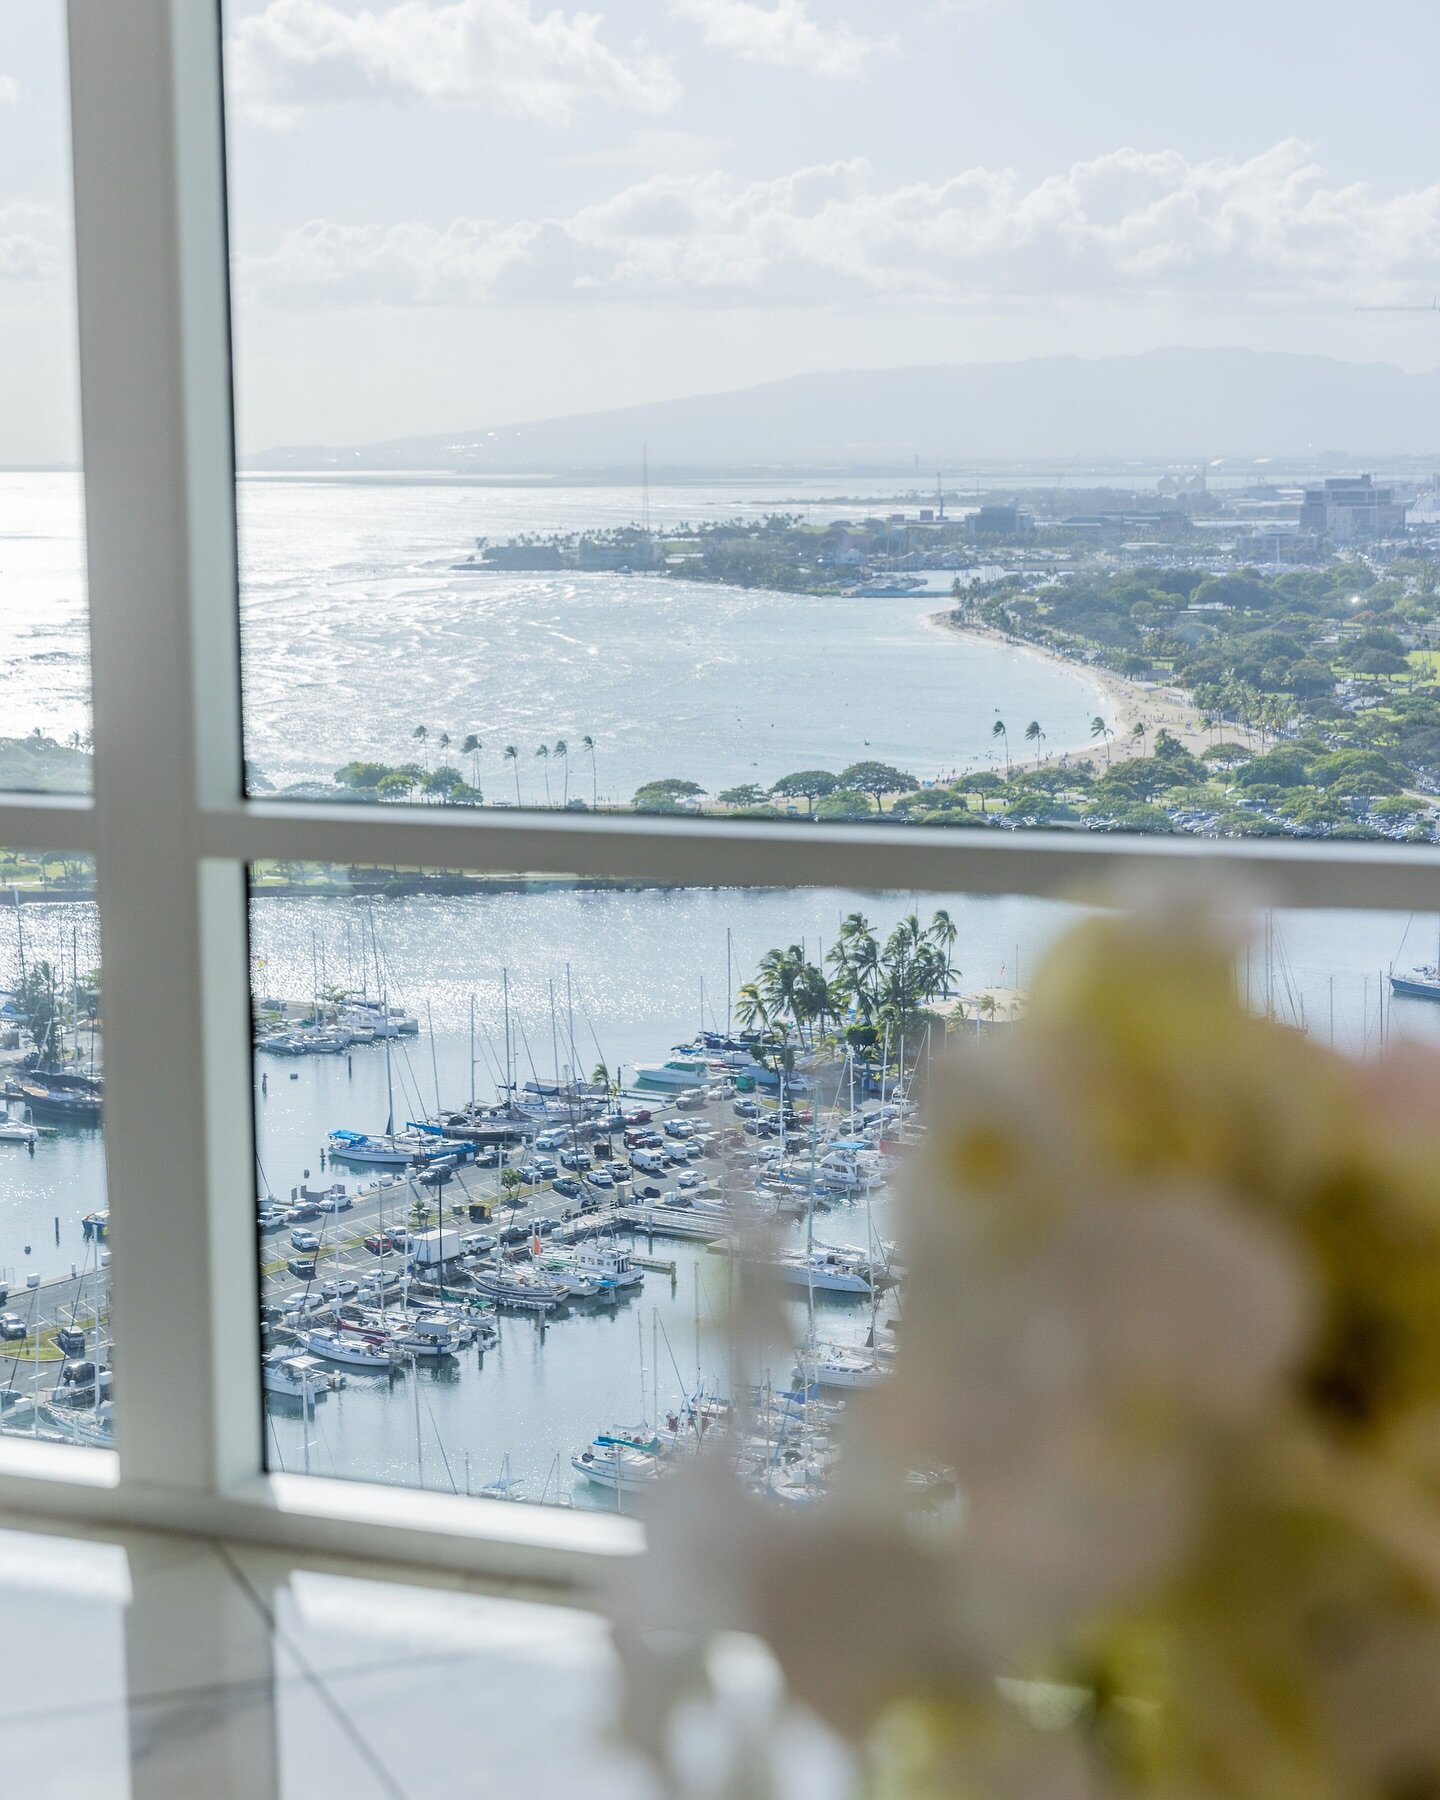 Join us for an Easter celebration filled with culinary delights. Gather with loved ones amidst our luxurious ambiance and magical view of Waikiki and create unforgettable memories this Easter. 

Reserve your table now for an extraordinary dining expe